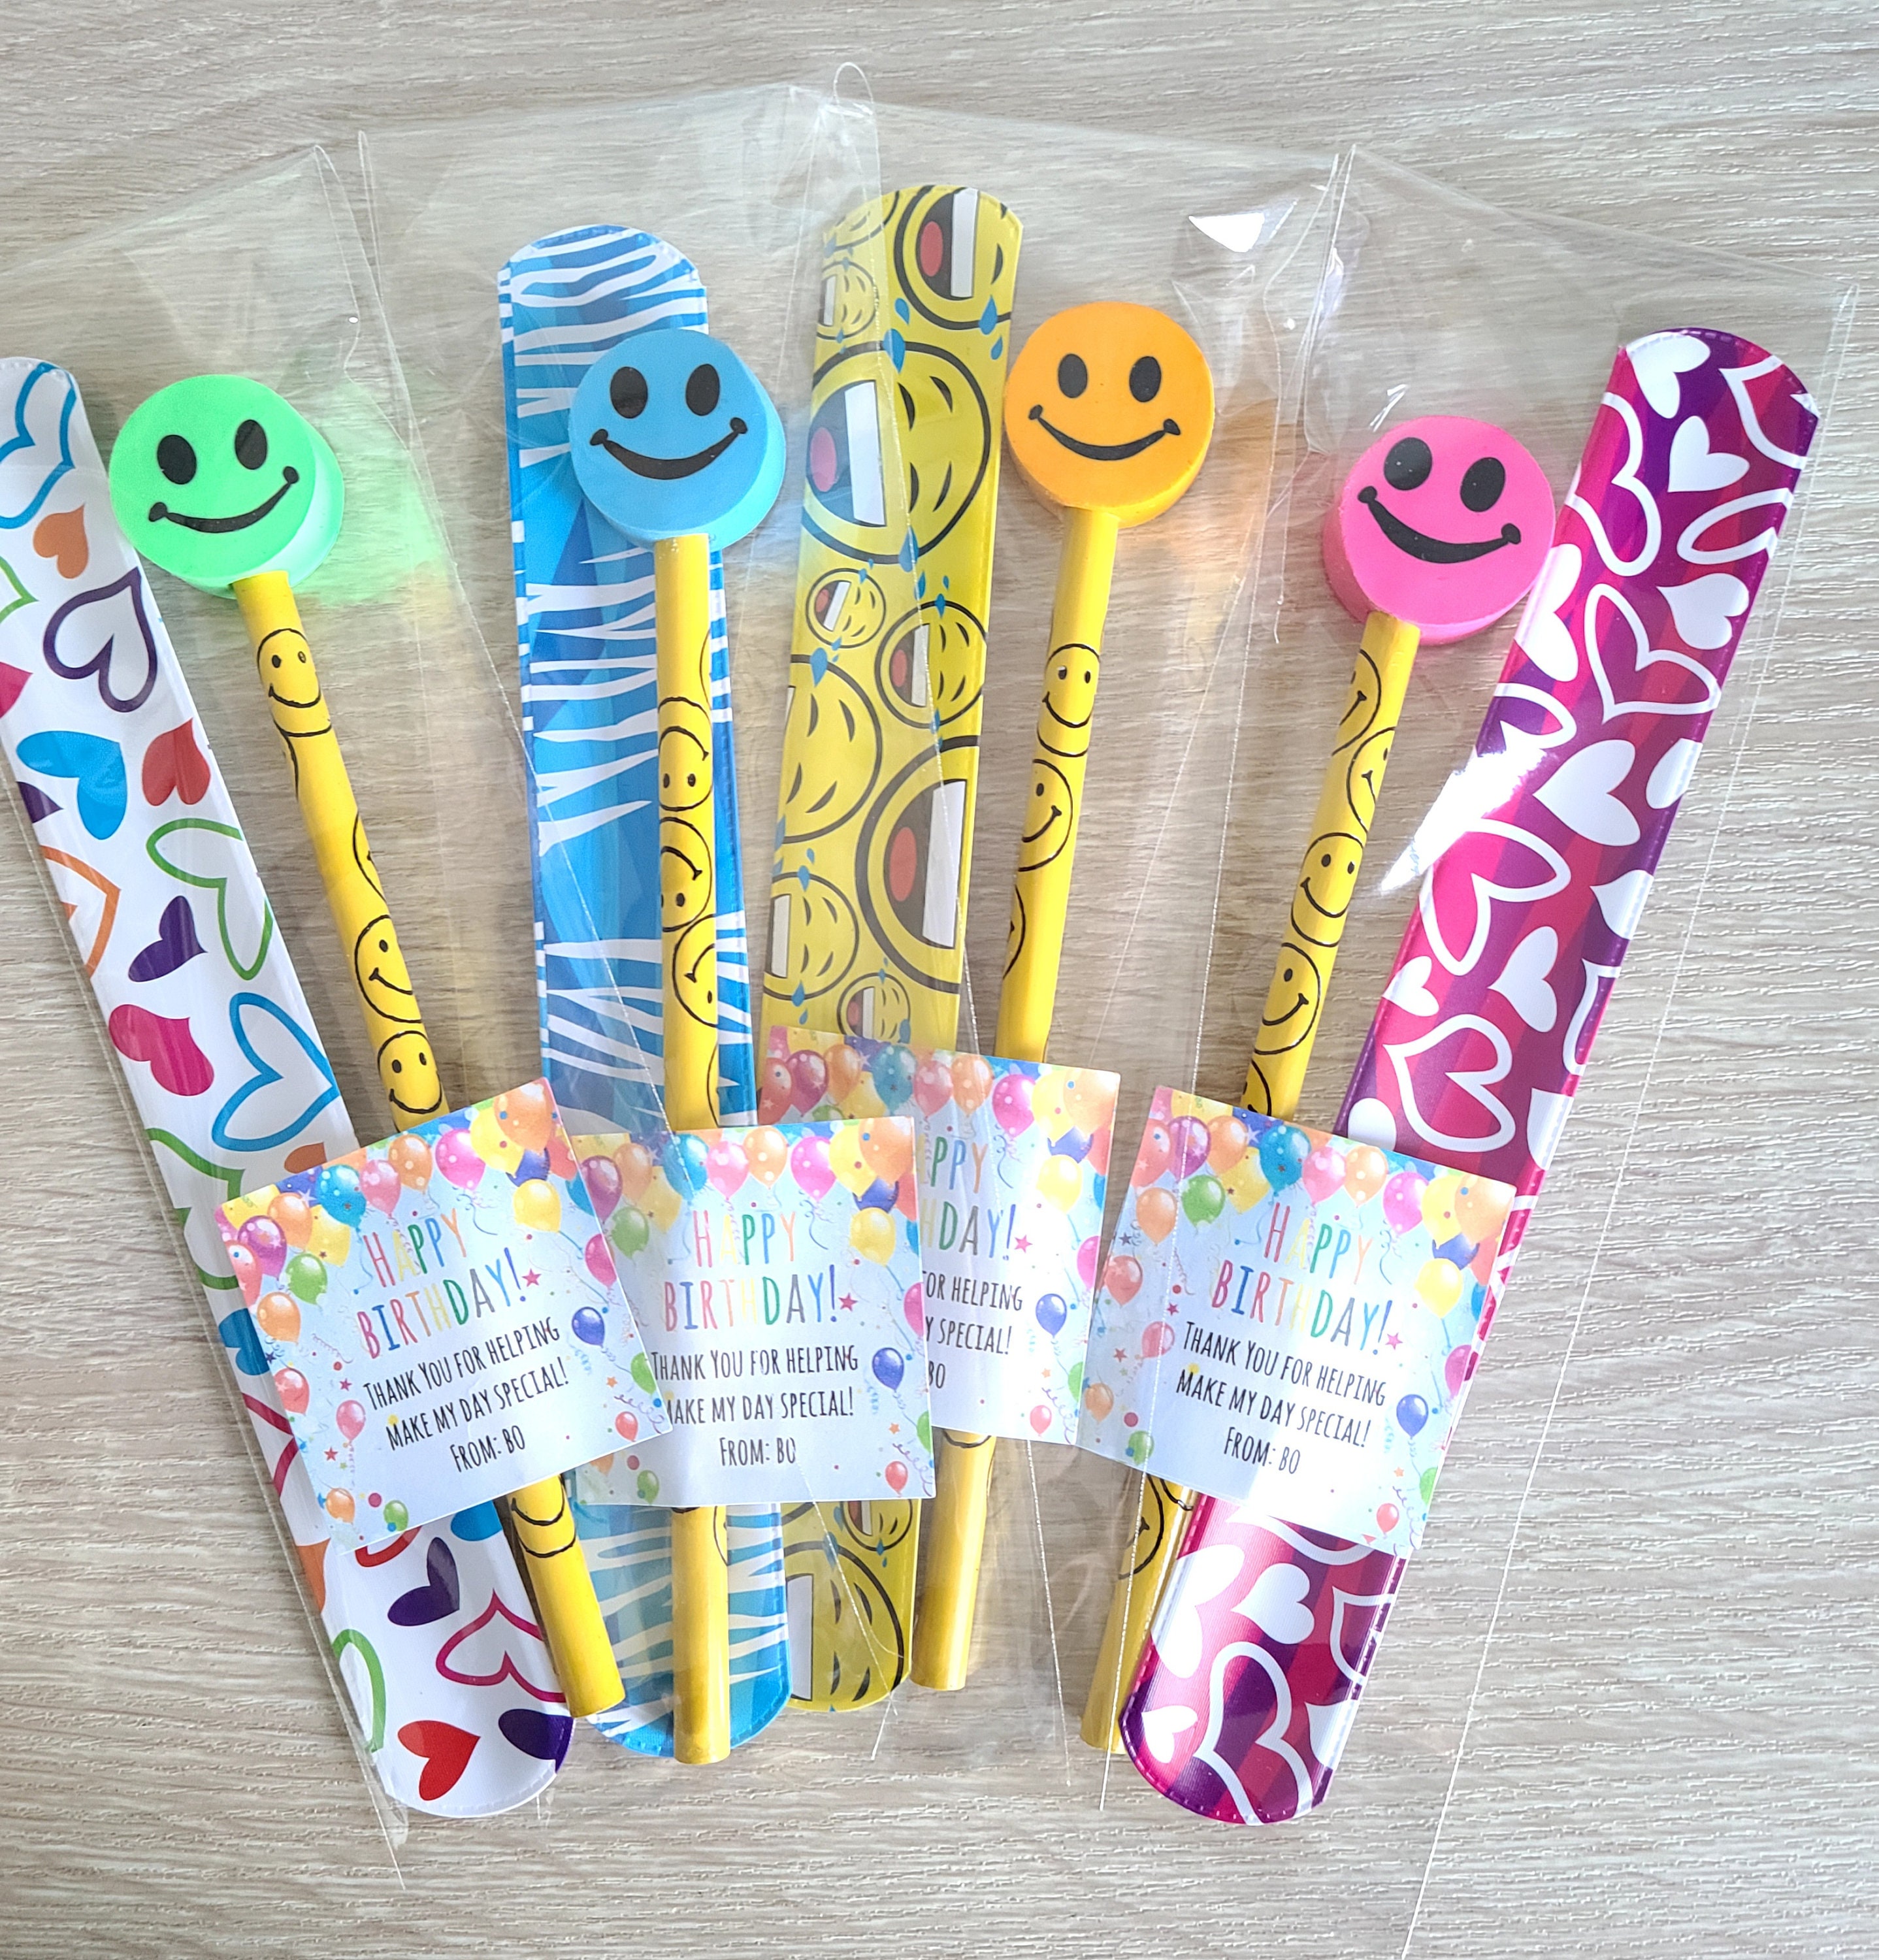  Yexiya 36 Pieces Fun Hero Pencils for Kids Fun Party Christmas  Pencils Hero Party Decorations Hero Pencils with Eraser for Birthday Party  Favors Prize Carnival Goodie Bag Filling Rewards : Toys